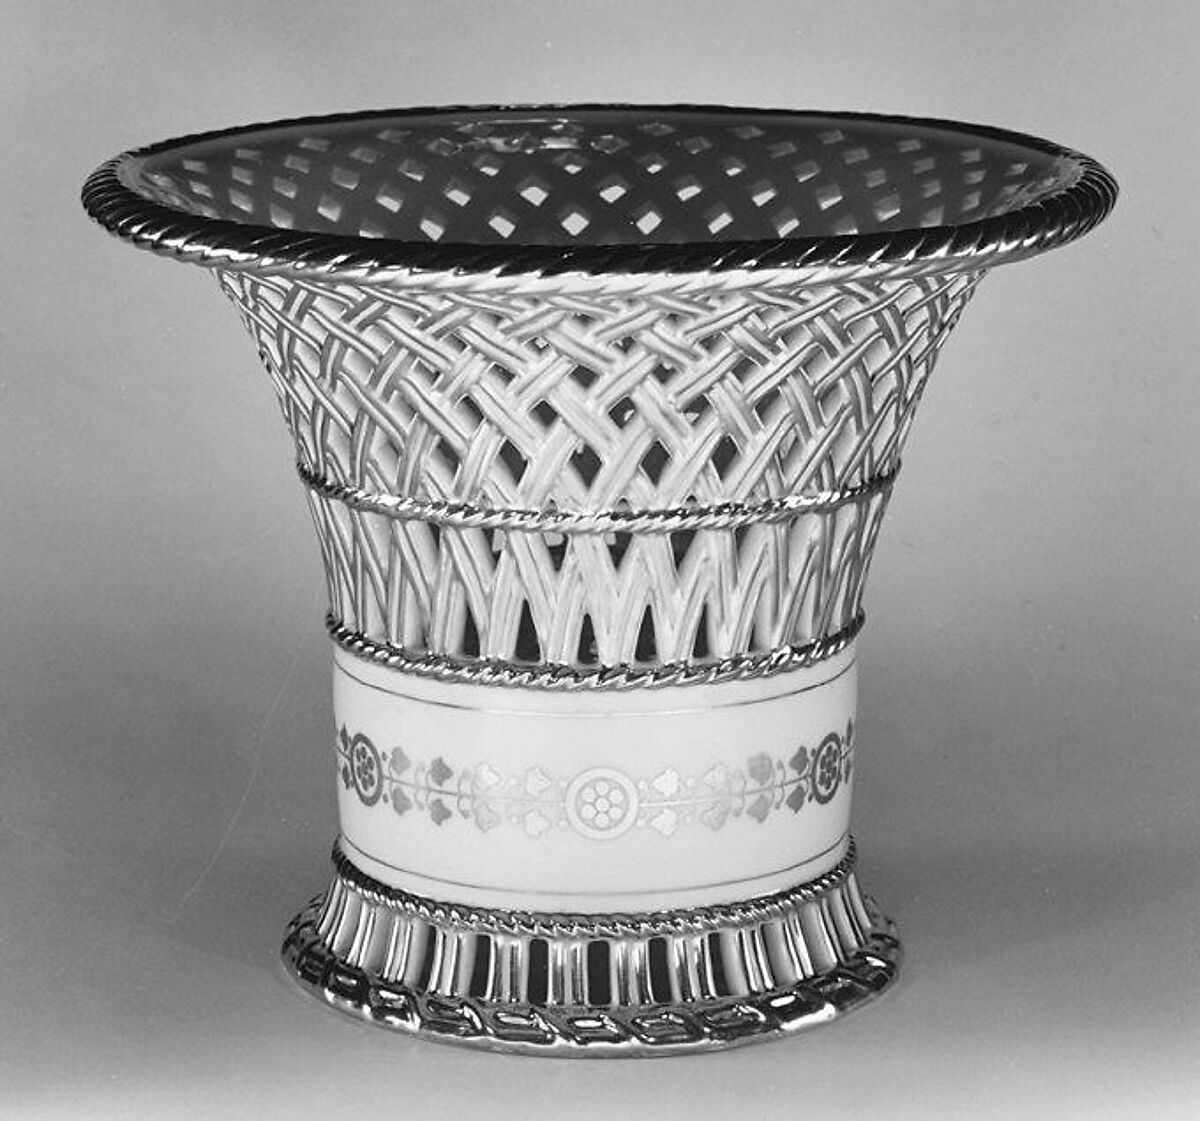 Fruit basket (one of a pair), Sèvres Manufactory (French, 1740–present), Hard-paste porcelain, French, Sèvres 